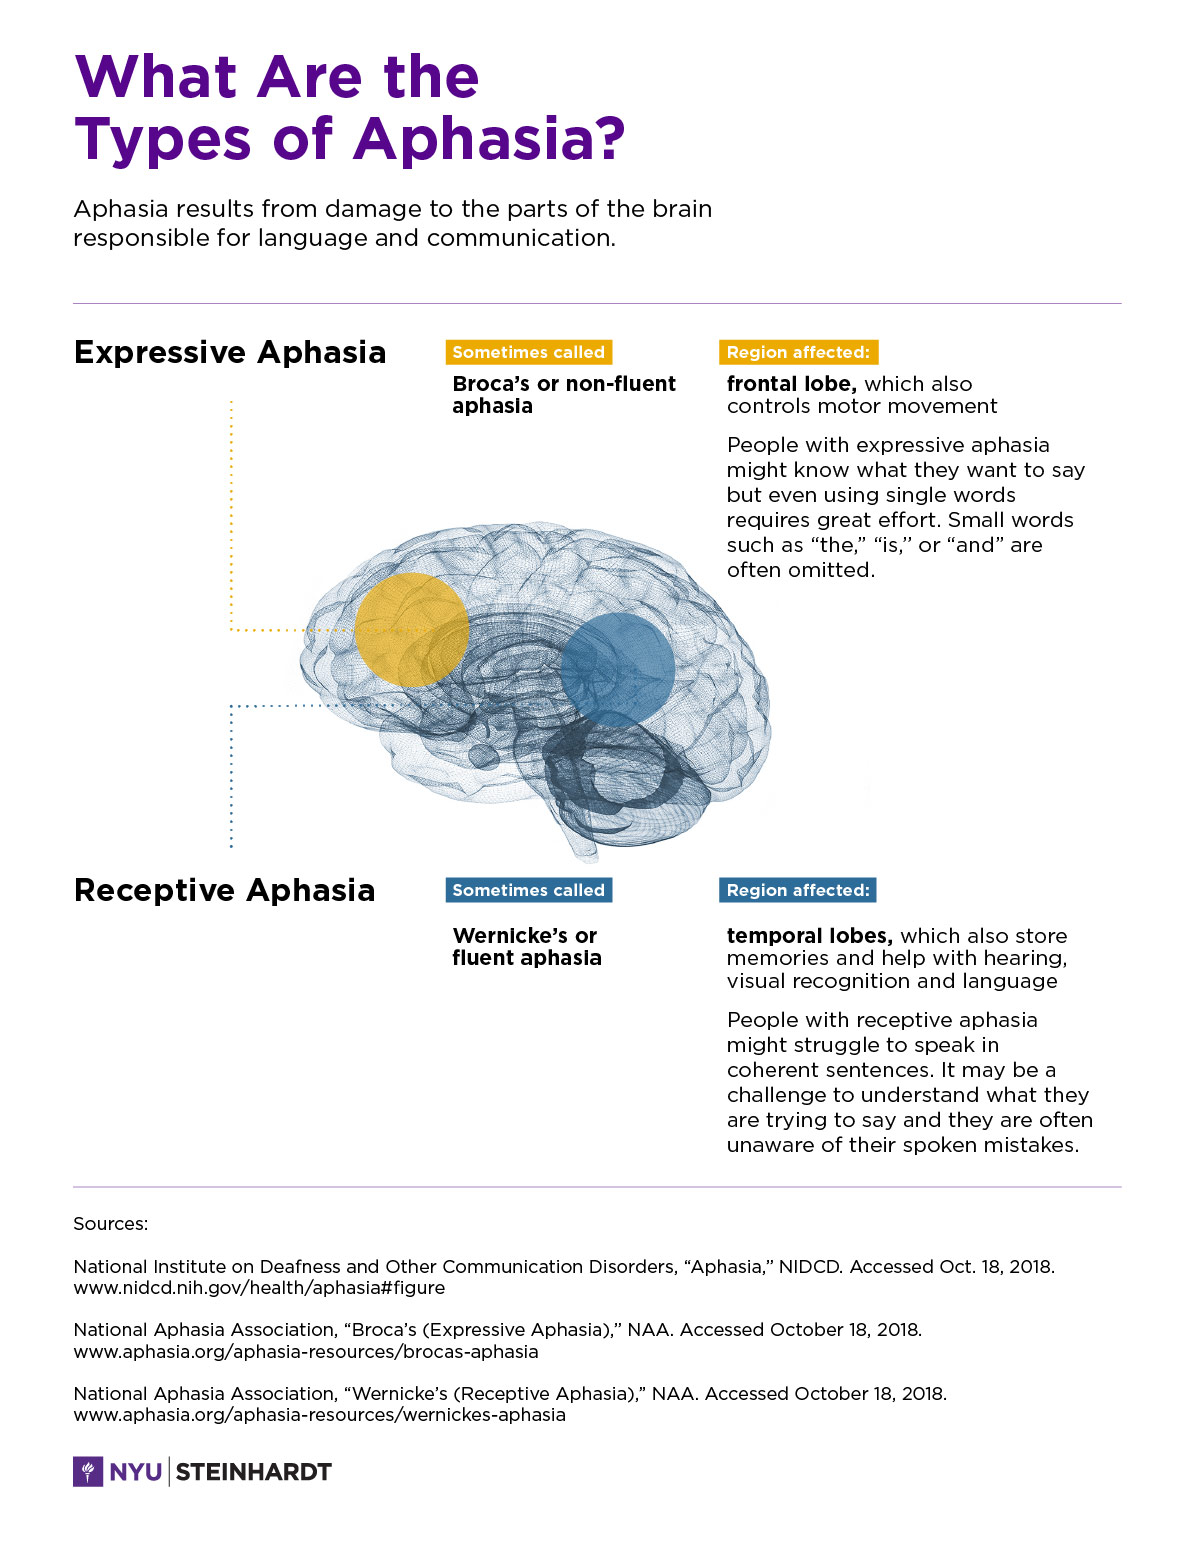 Illustration showing which parts of the brain, when damaged, can cause expressive and receptive aphasia.